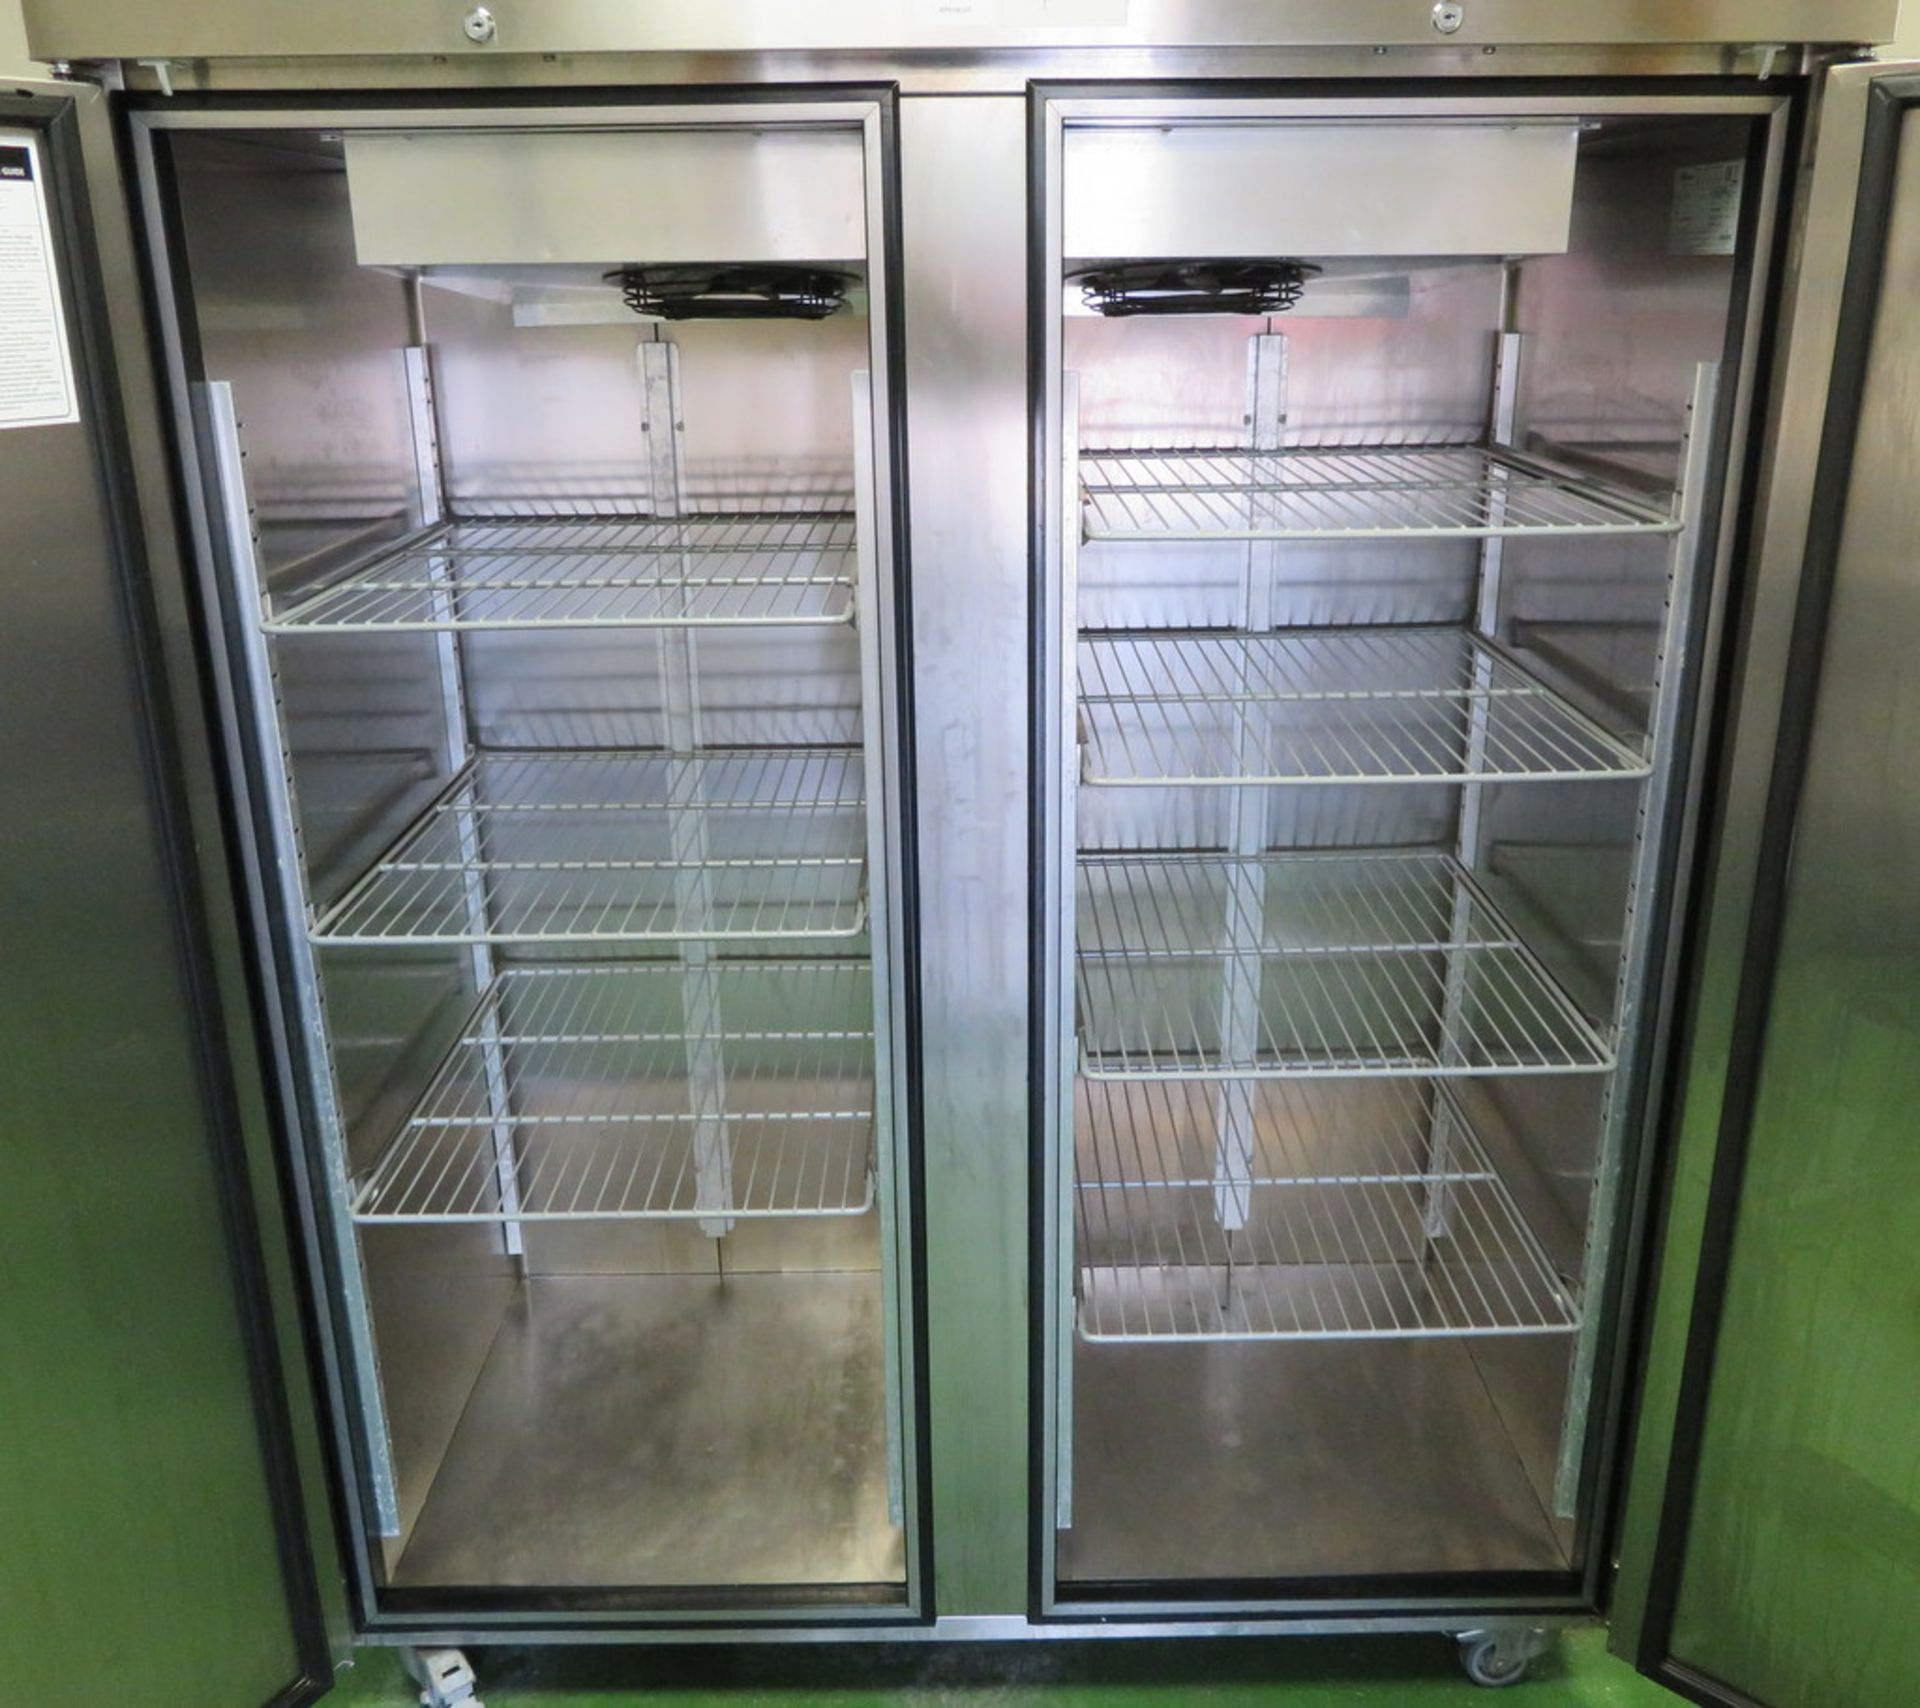 FOSTER MODEL EXTRA FXT1351H TWO DOOR REFRIGERATOR - Image 2 of 3